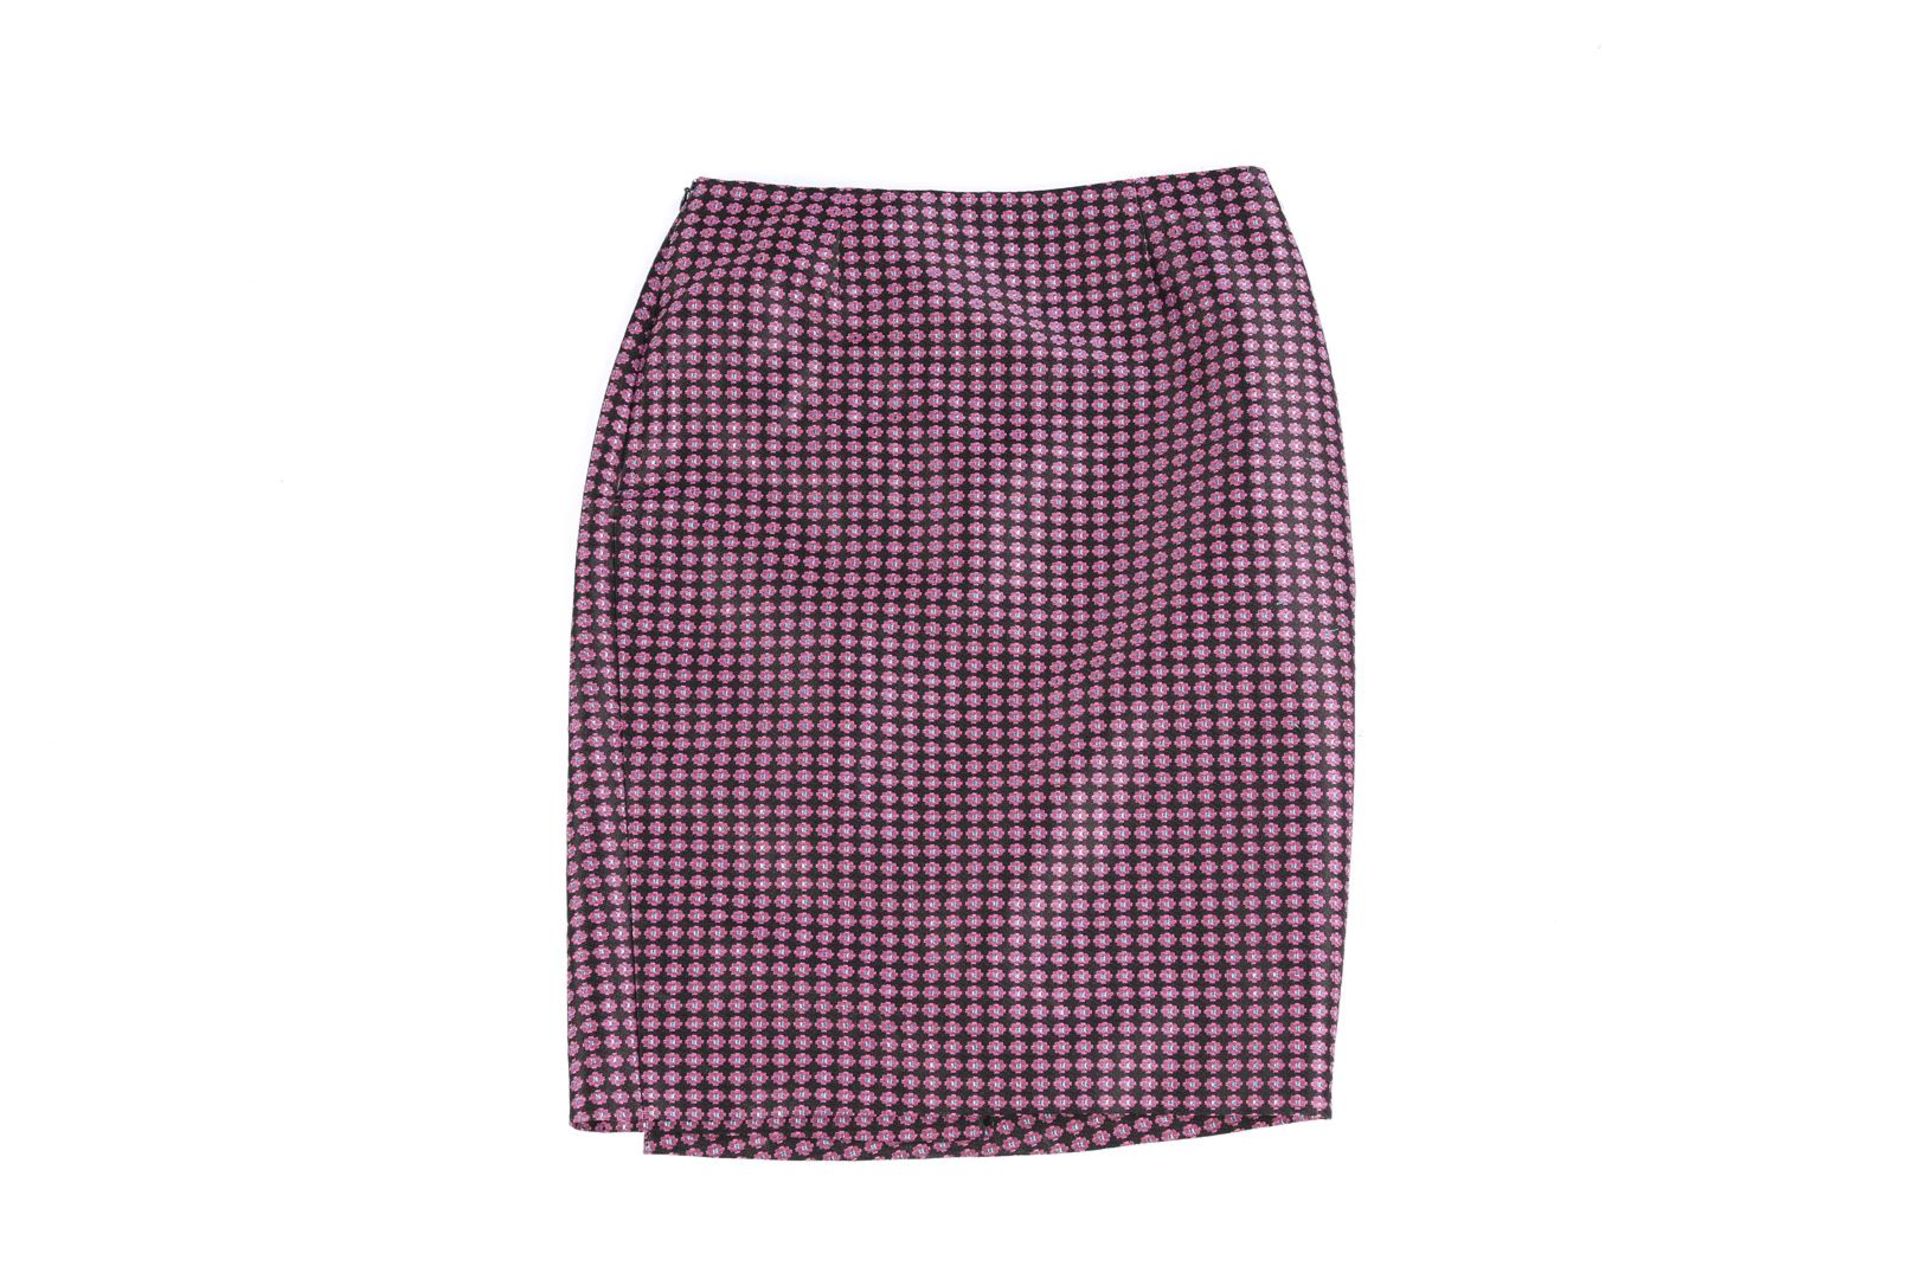 Mochino, a purple floral skirt. Size: 40 It. - Image 2 of 3